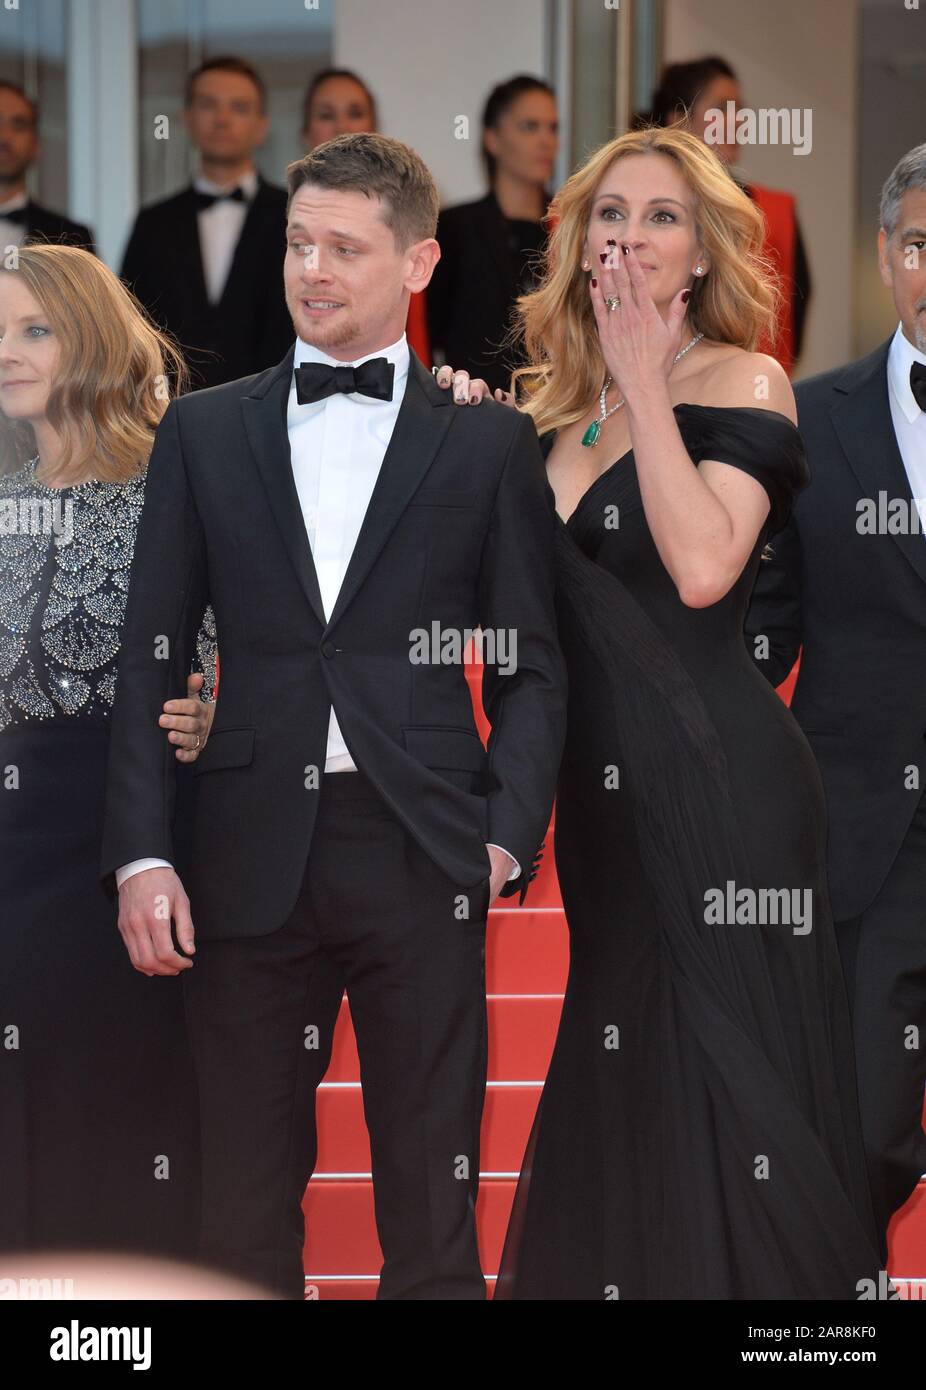 CANNES, FRANCE - MAY 12, 2016: Actors Jack O'Connell & Julia Roberts at the gala premiere for 'Money Monster' at the 69th Festival de Cannes. Stock Photo